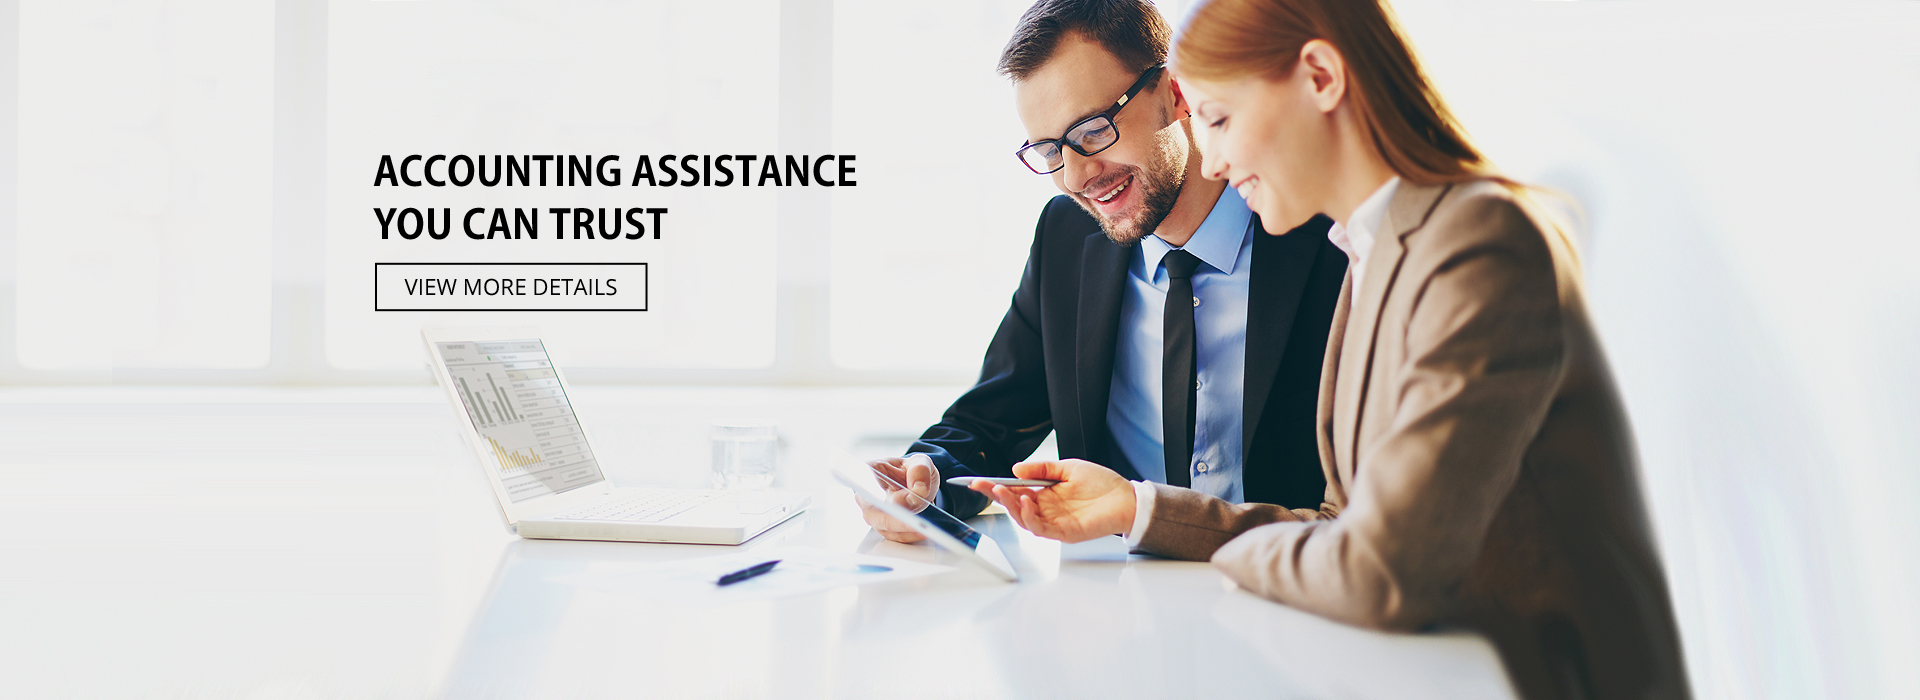 Account Assistance you Can Trust